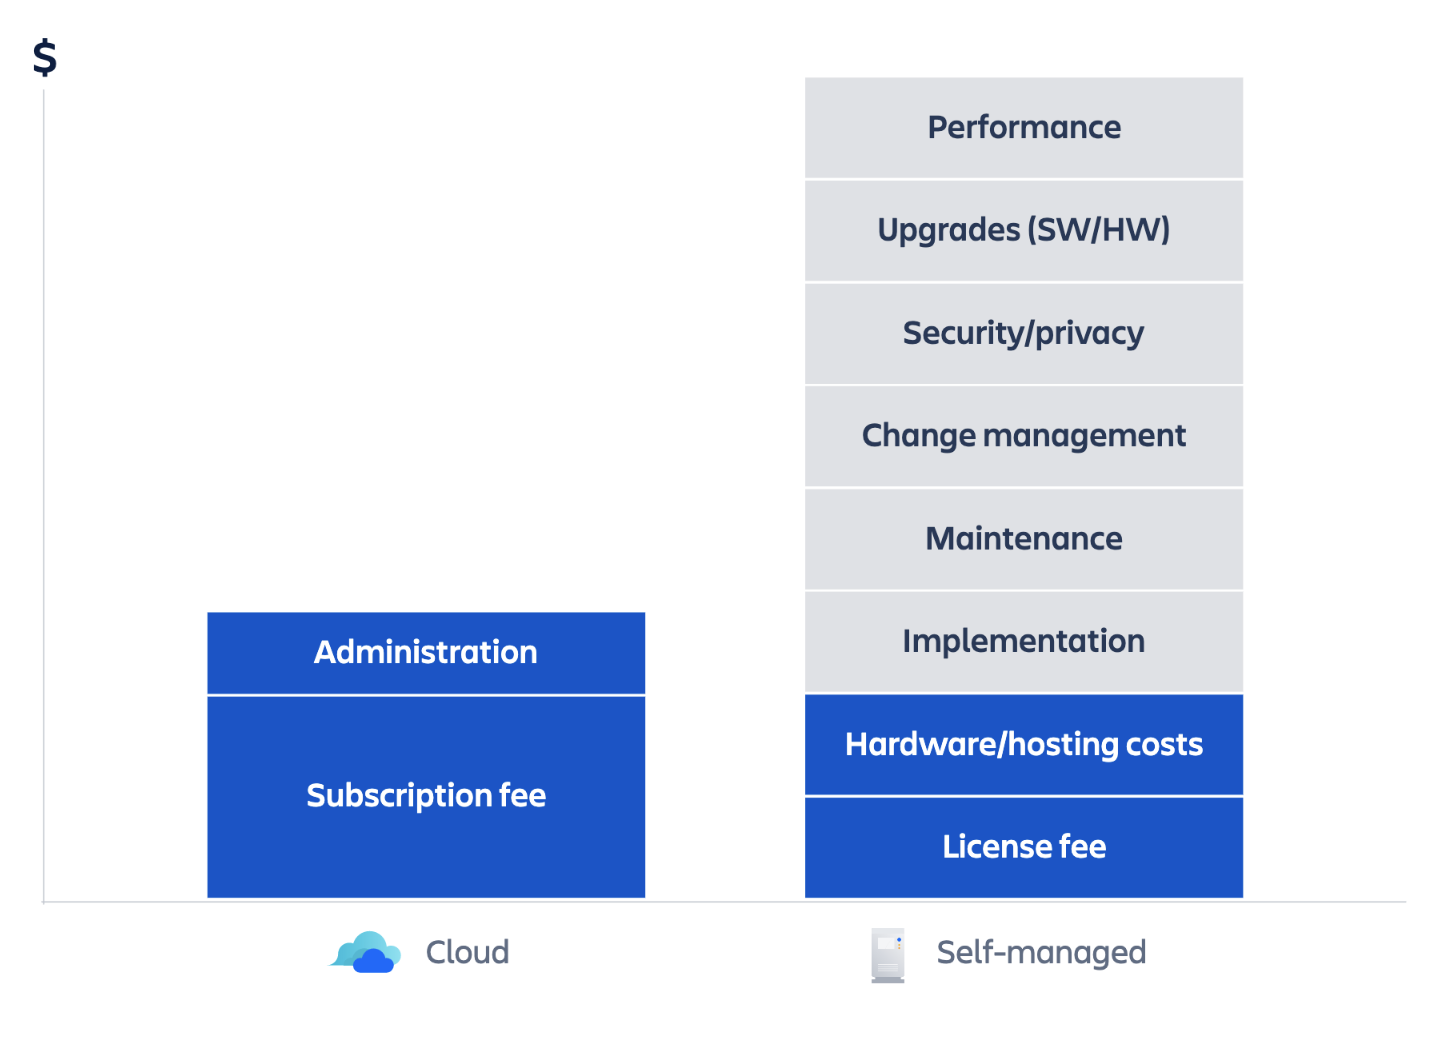 Compared to a typical Total Cost of Ownership (TCO) of a self-managed Atlassian instance, Atlassian Cloud offers a huge cost advantage and simplicity